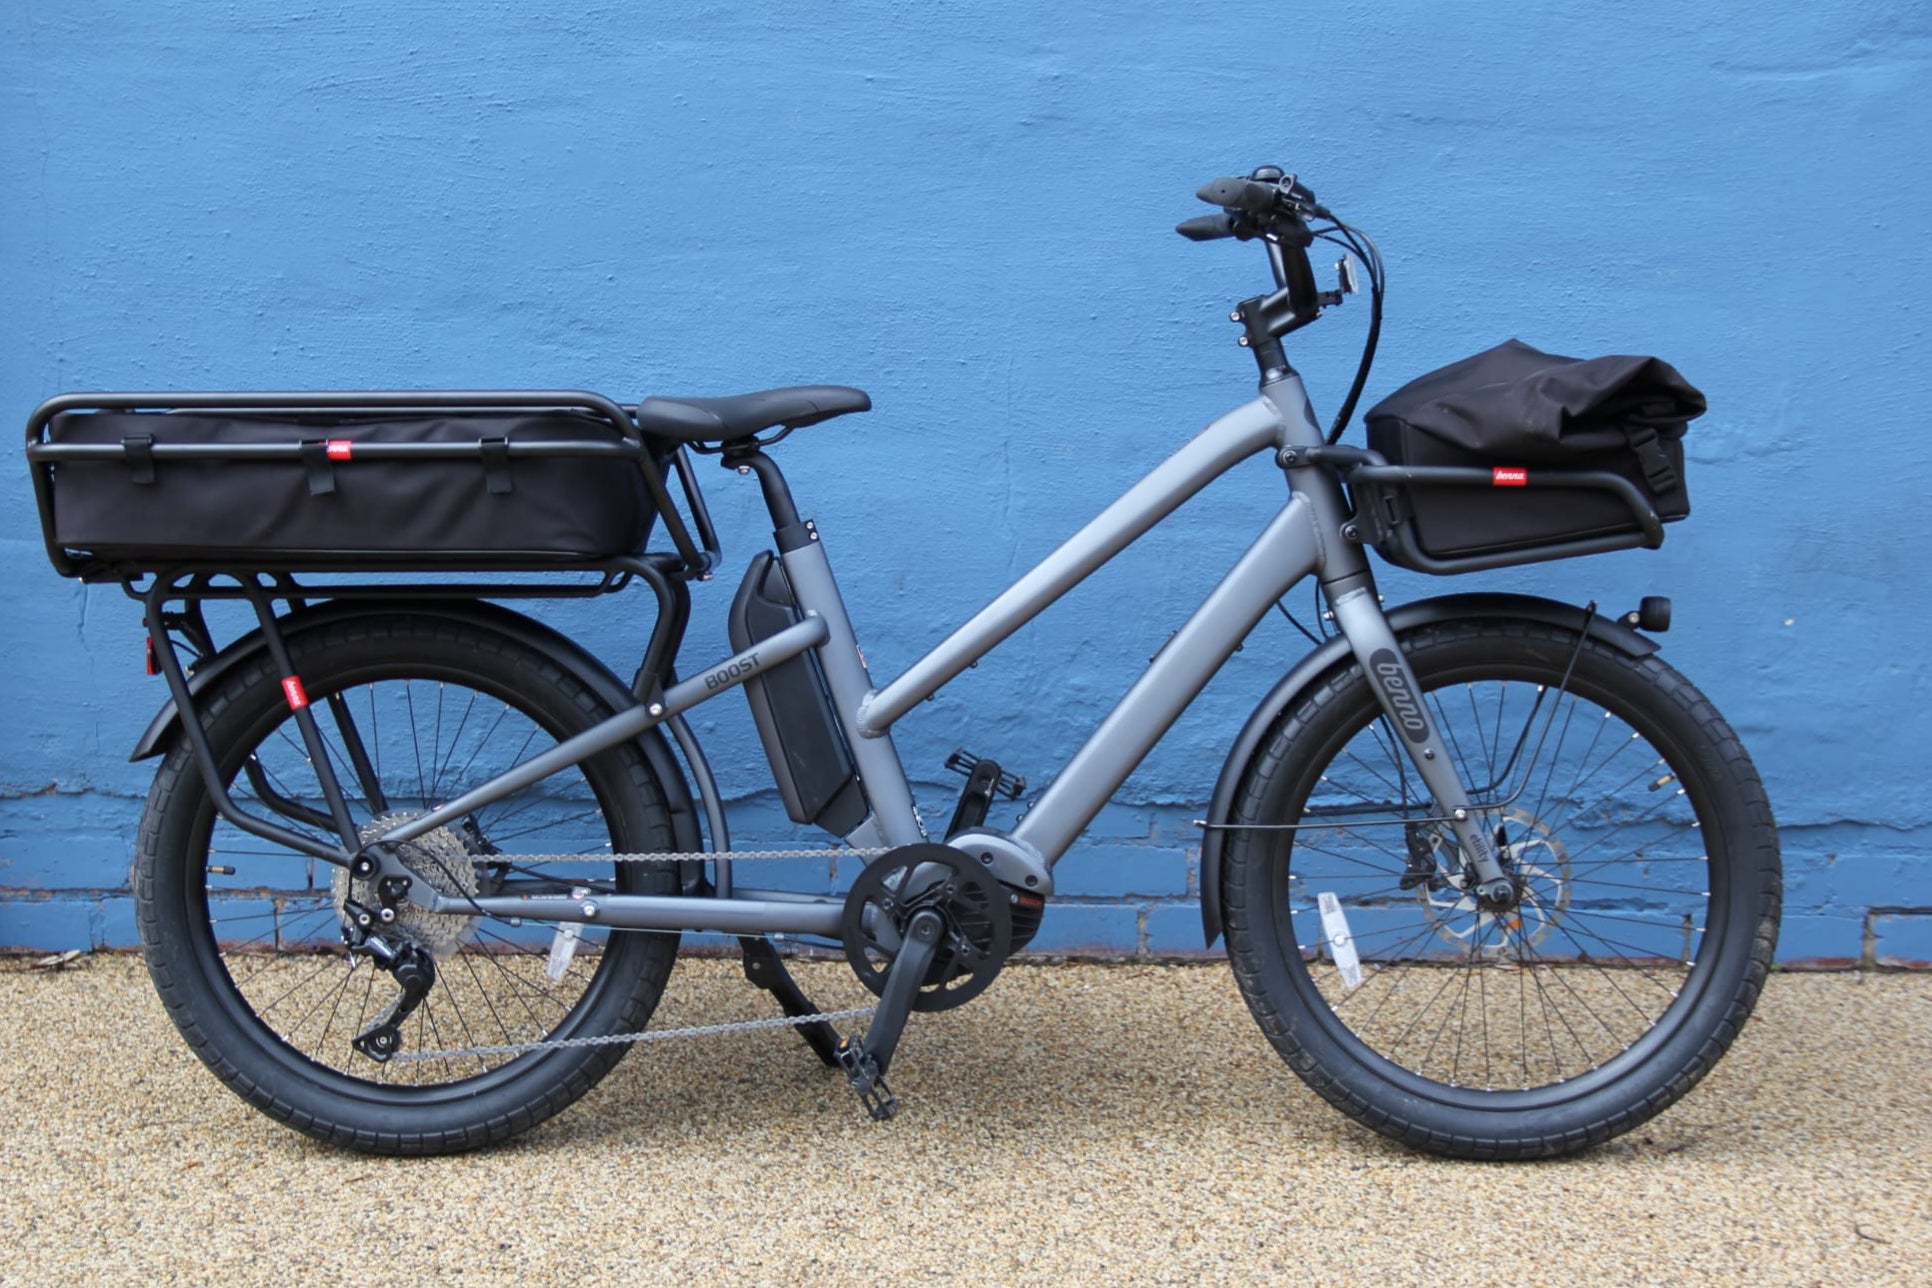 A Benno Front Utility Bag Fits the Tern GSD Transporteur Rack